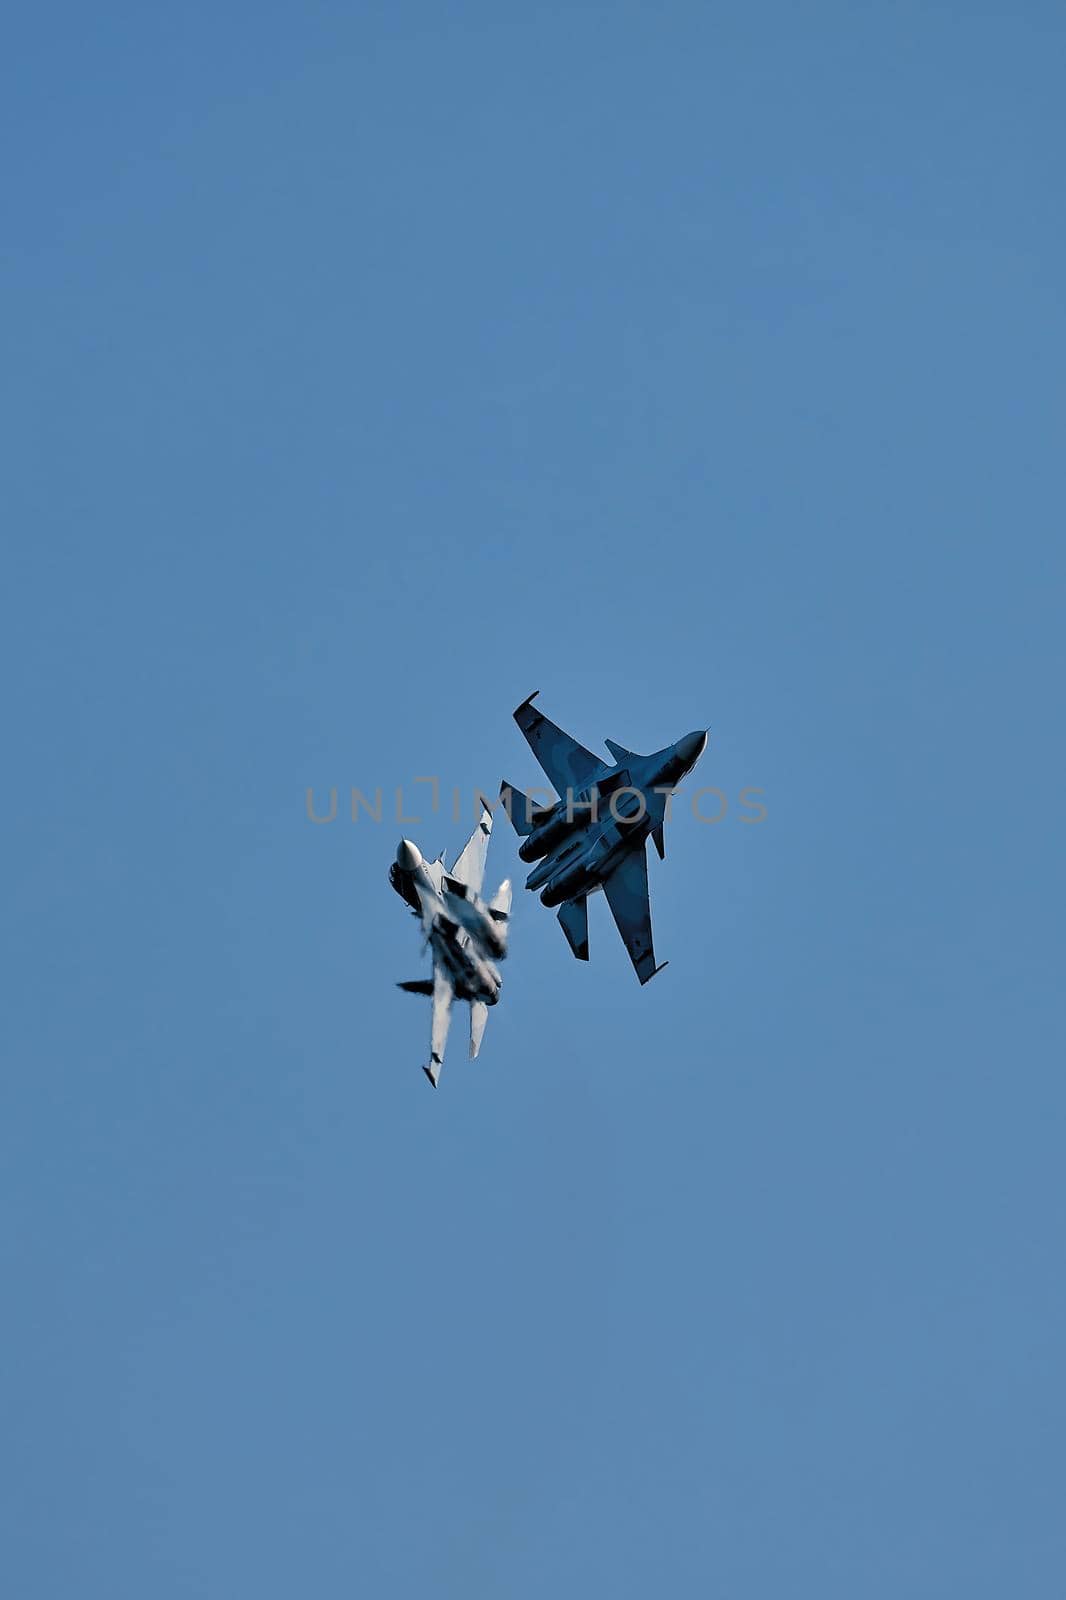 Sukhoi Su-30SM russian air force. Twin jet engine heavy fighter Su-30SM nato codification-Flanker. Fighter bomber jet aircraft fly aerobatic maneuver. MAKS 2019. RUSSIA, AUGUST 29, 2019.